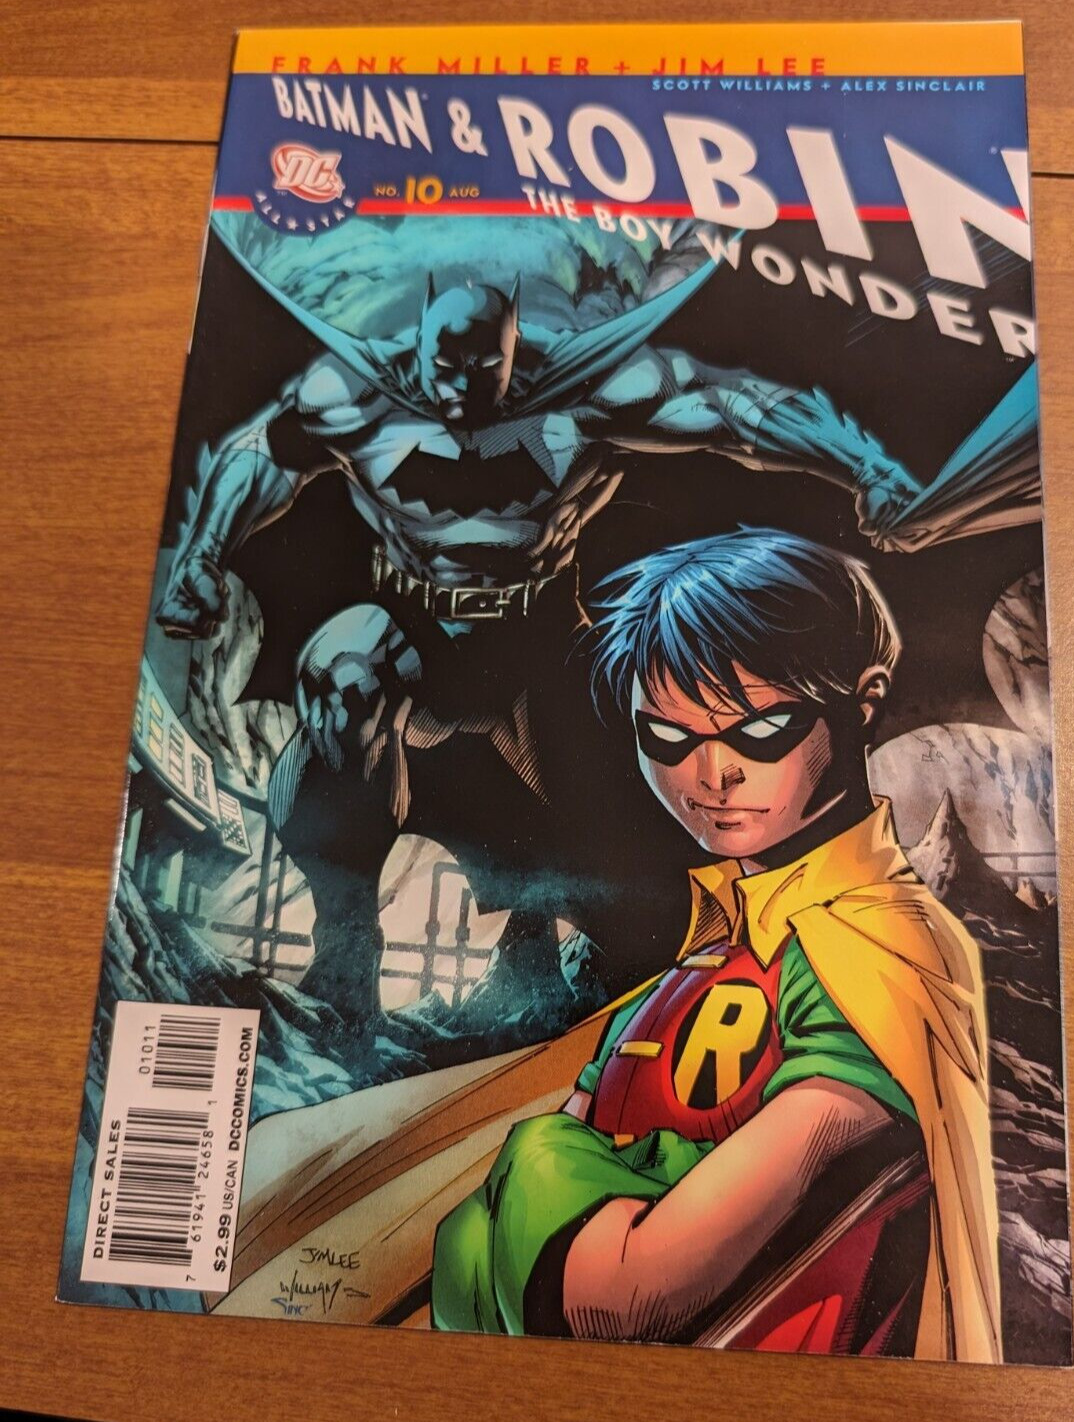 ALL-STAR BATMAN & ROBIN #10 (2008) RECALLED EDITION CAN STILL SEE THE BAD-WORDS